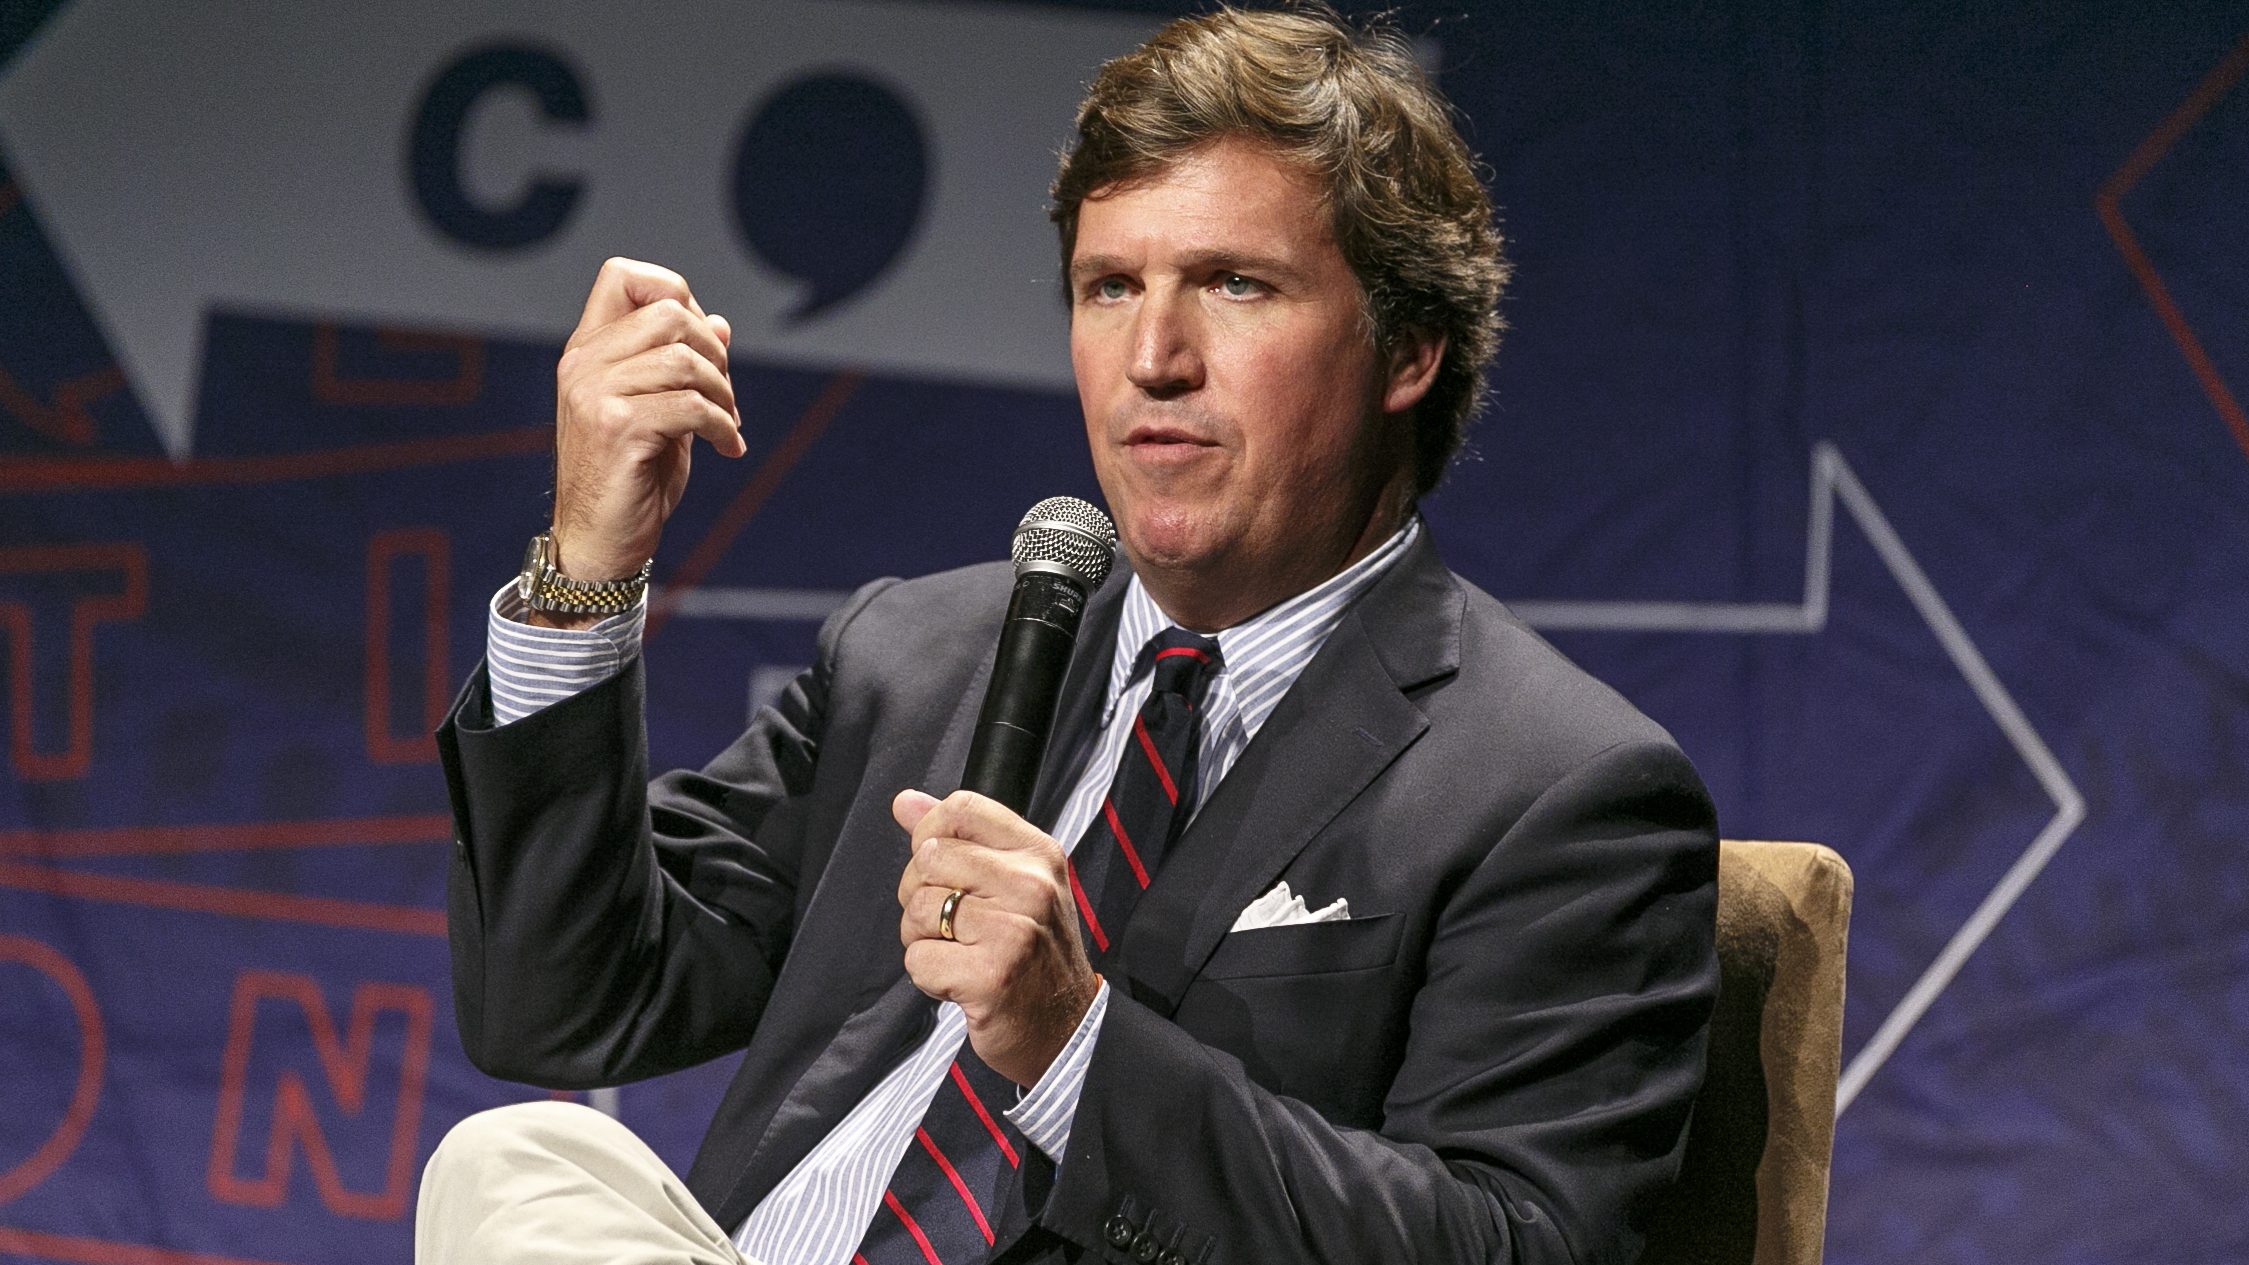 Tucker Carlson Loses Advertisers After Controversial Comments